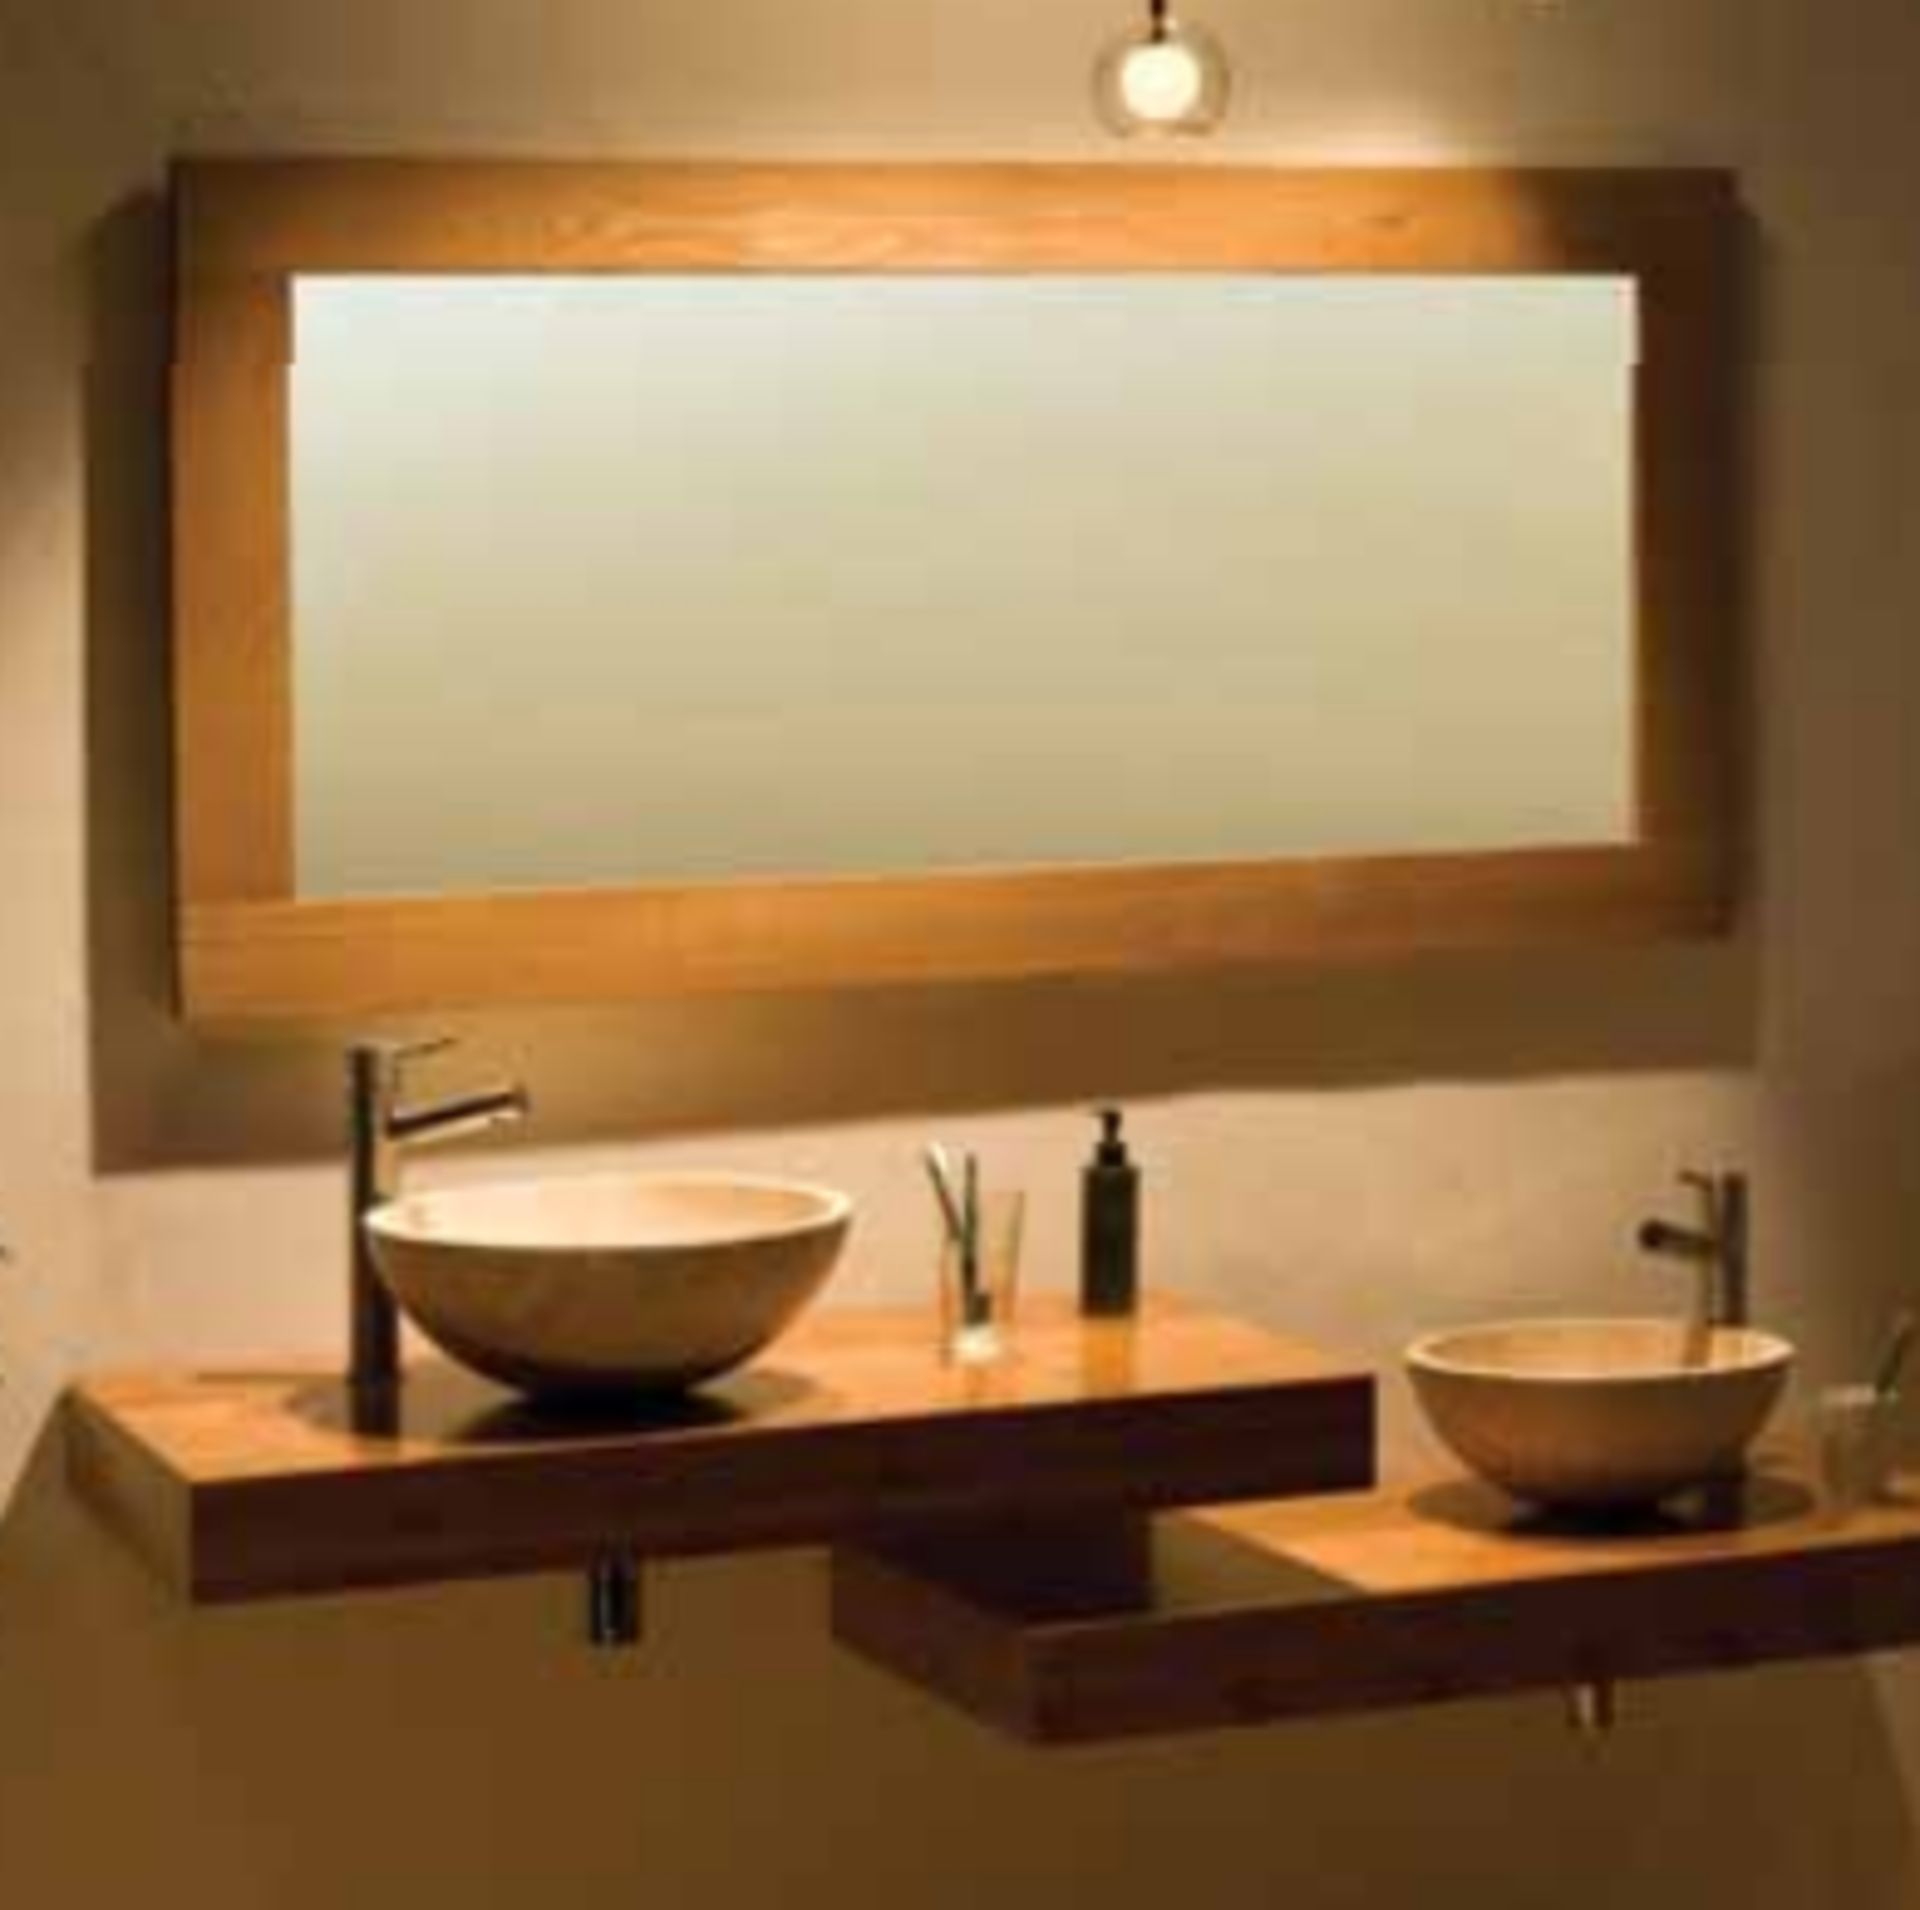 1 x Stonearth Bathroom Wall Mirror With Solid Walnut Frame and Bevelled Glass Mirror - Size: Large - Image 2 of 11